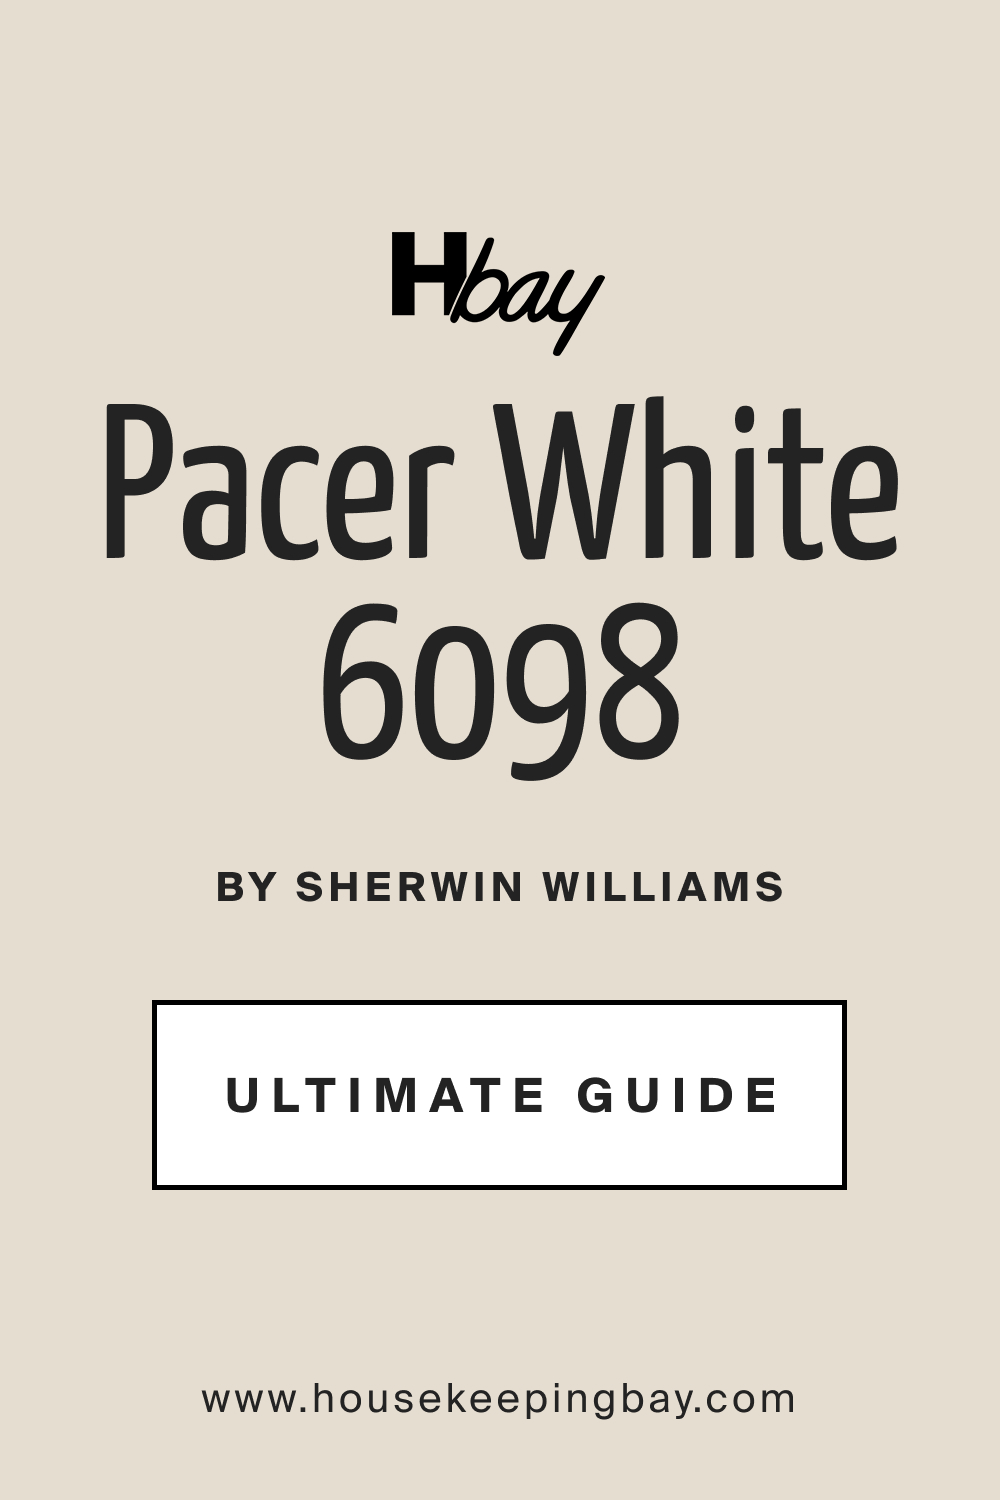 SW 6098 Pacer White by Sherwin Williams Ultimate Guide